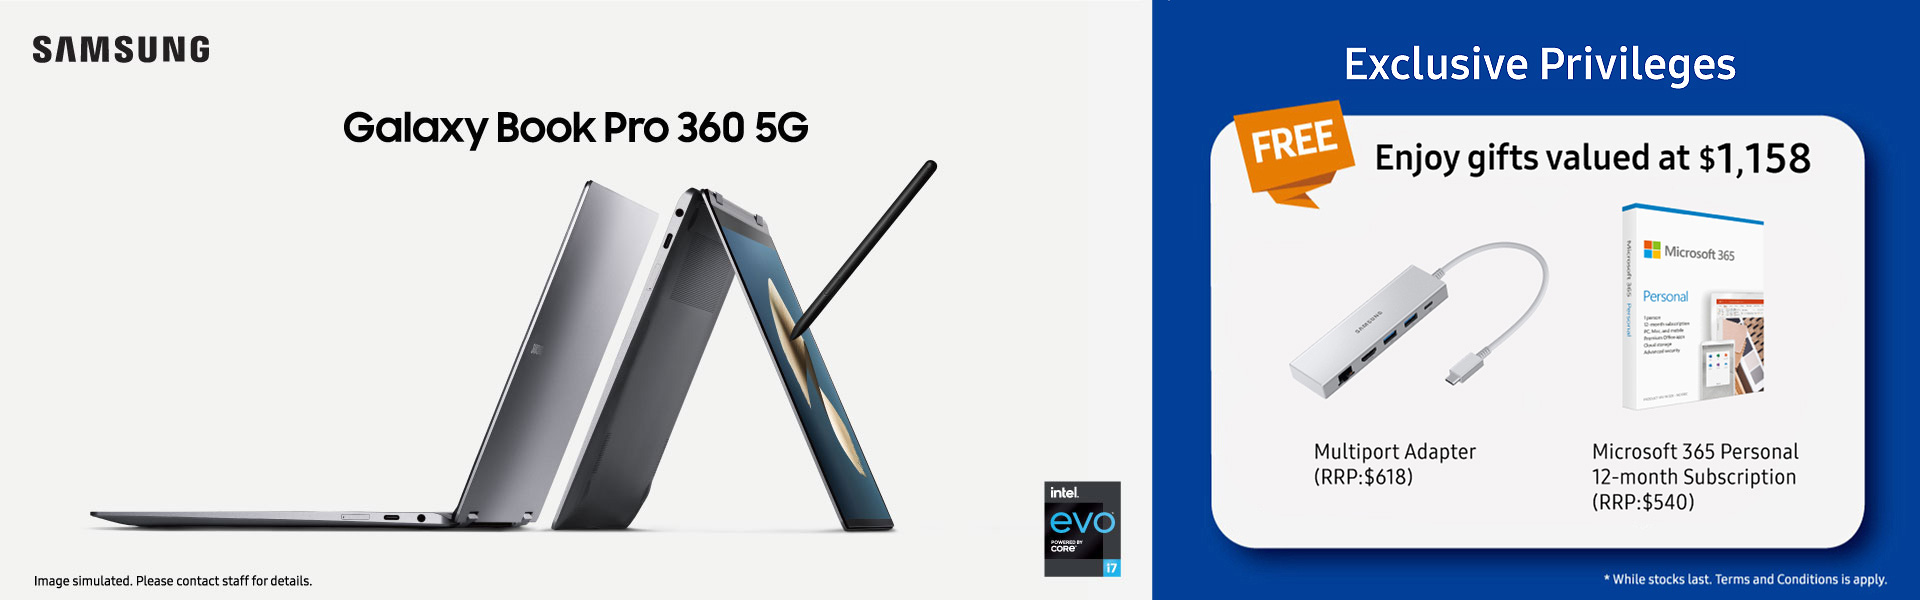 Up to $1,800 Standalone Discount upon 5G SIM subscription / contract. Pre-order to free value $1,544 Gifts.